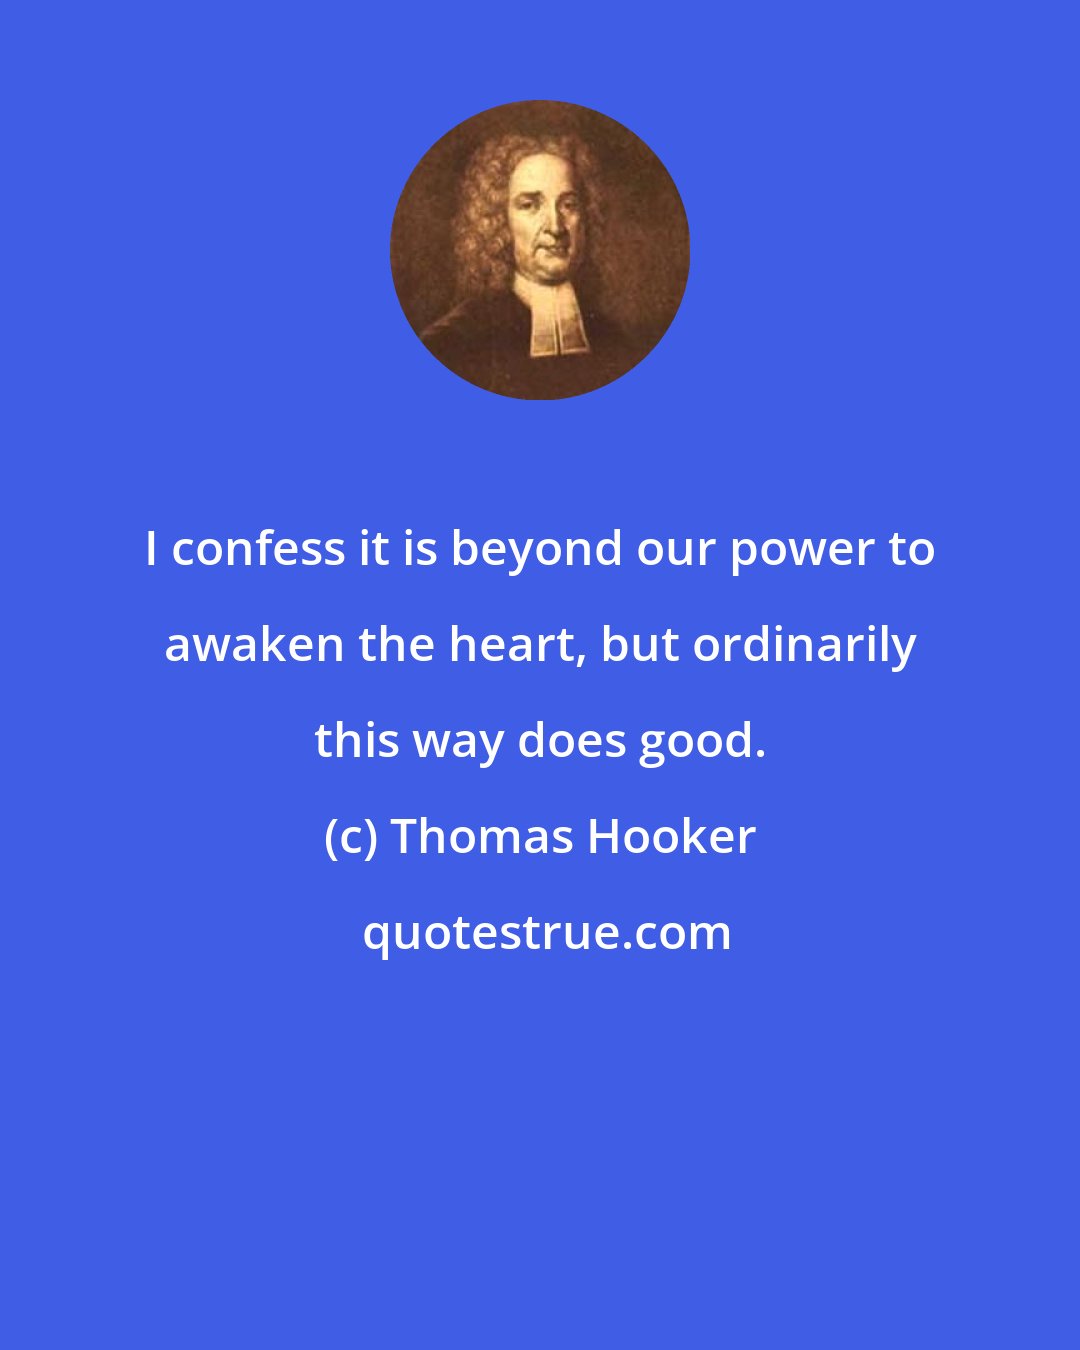 Thomas Hooker: I confess it is beyond our power to awaken the heart, but ordinarily this way does good.